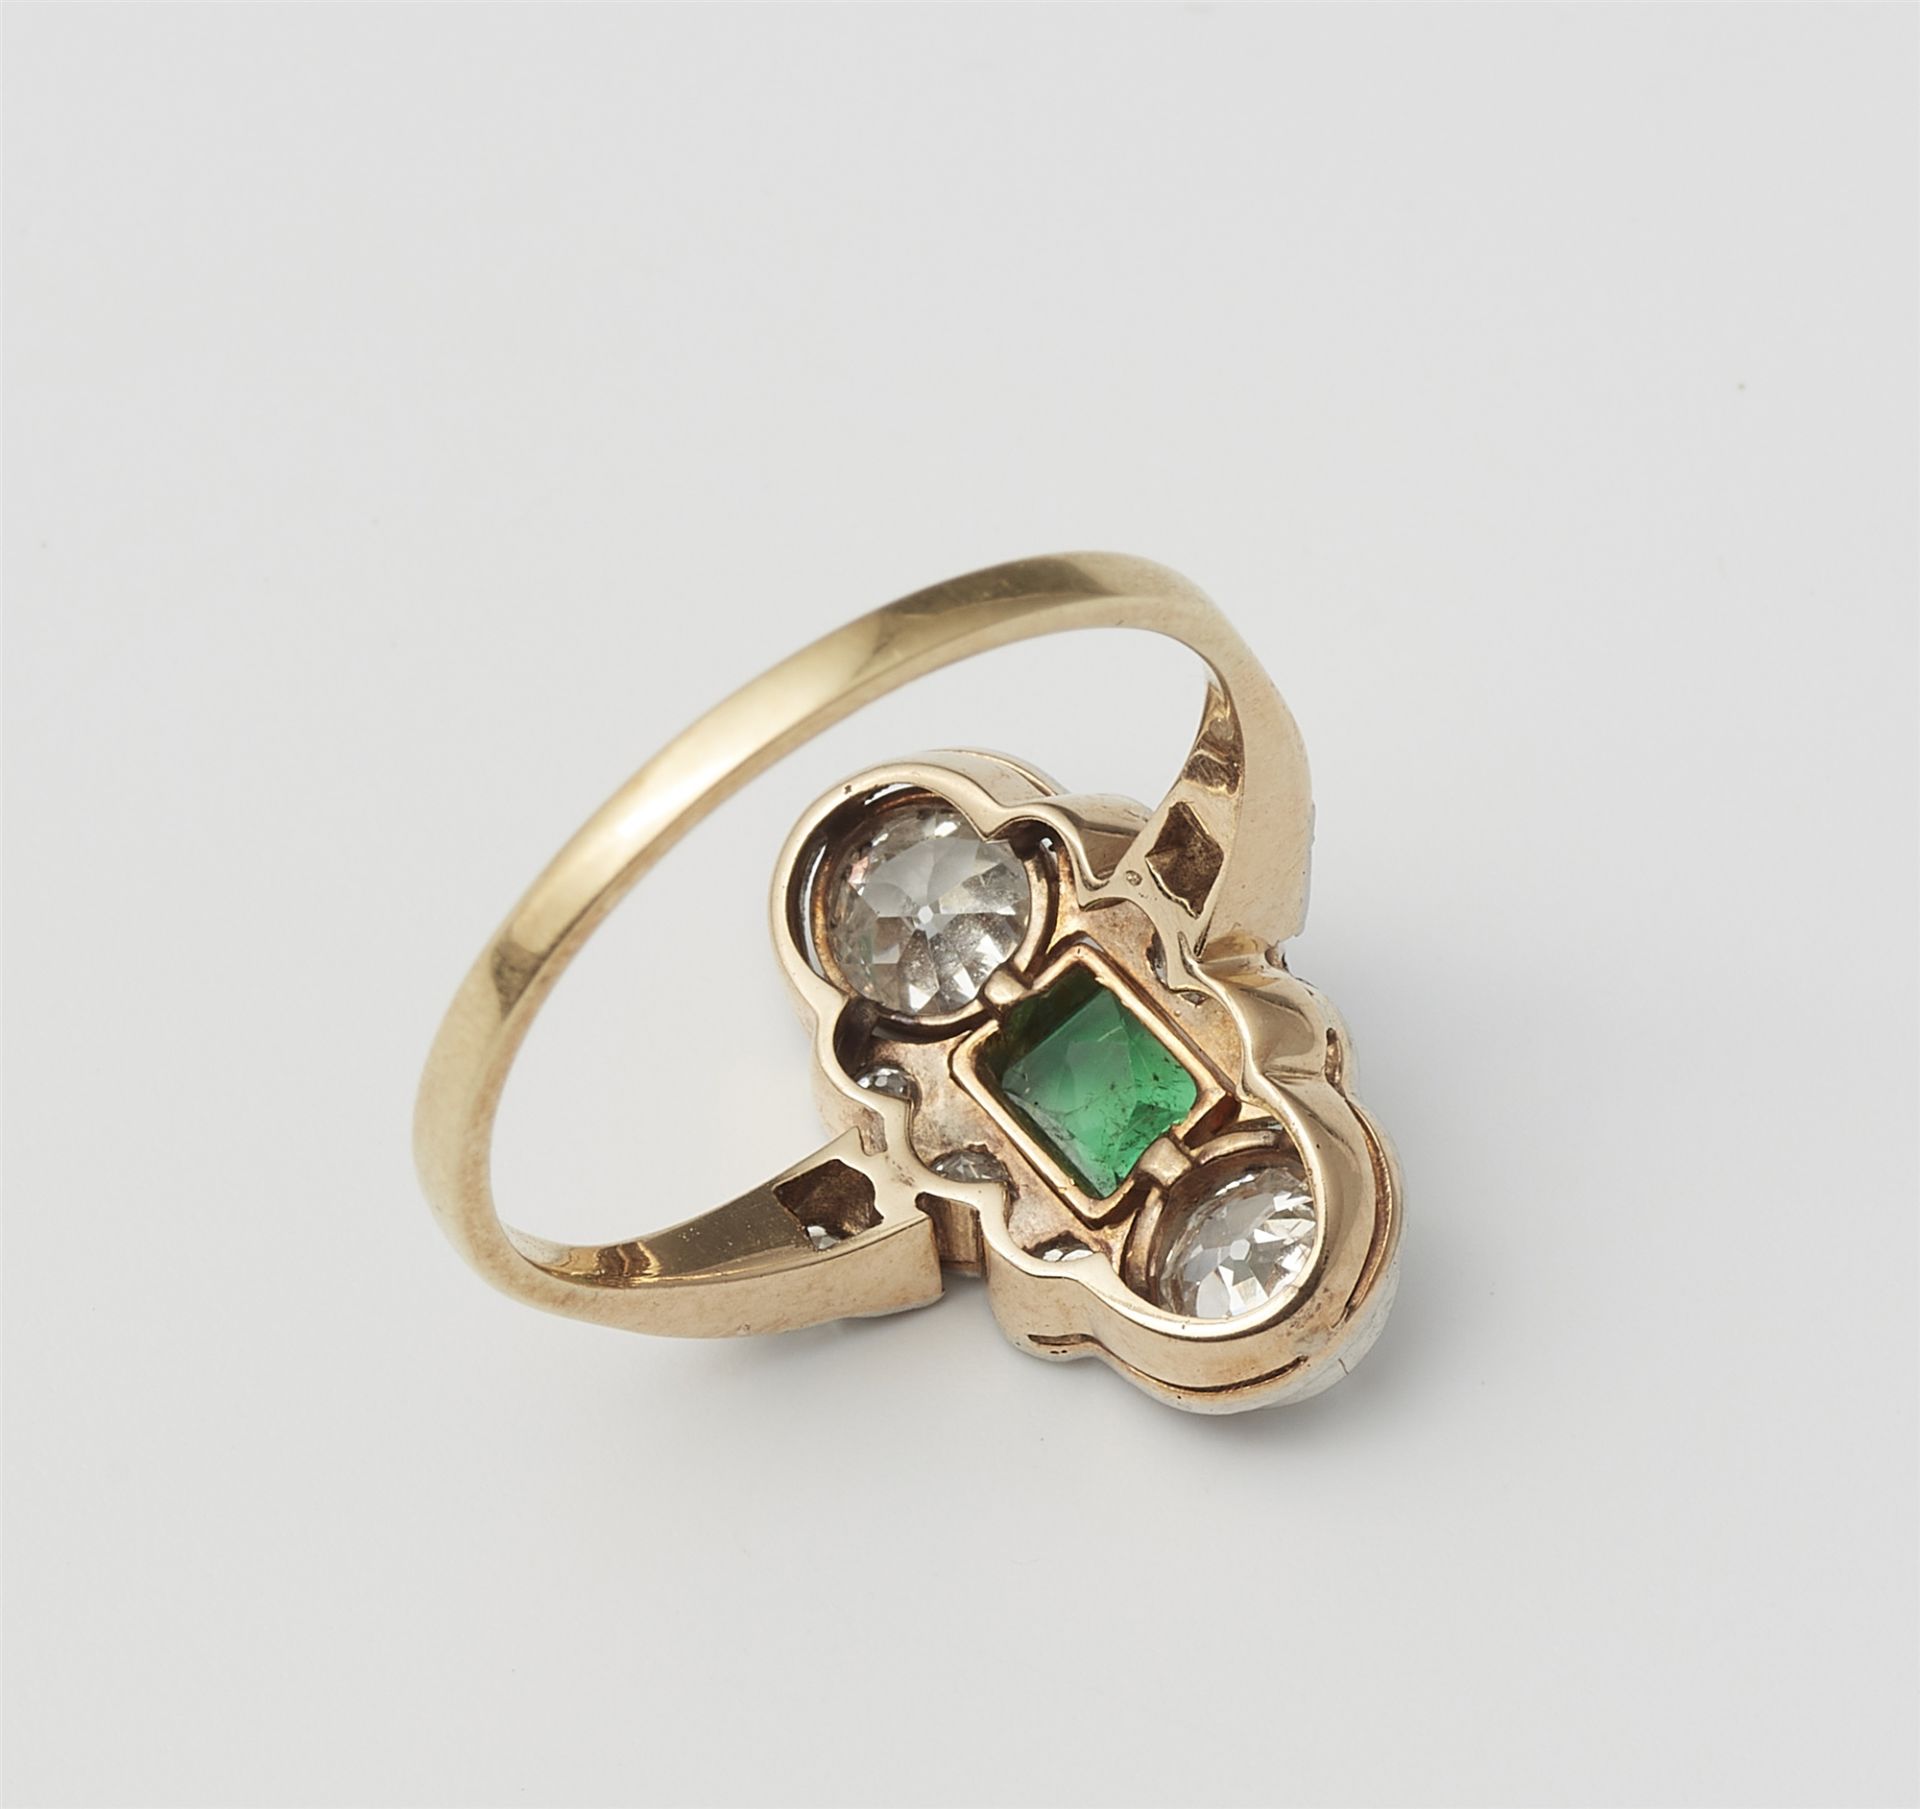 An Art Déco 14 kt gold platinum diamond and emerald ring. - Image 2 of 2